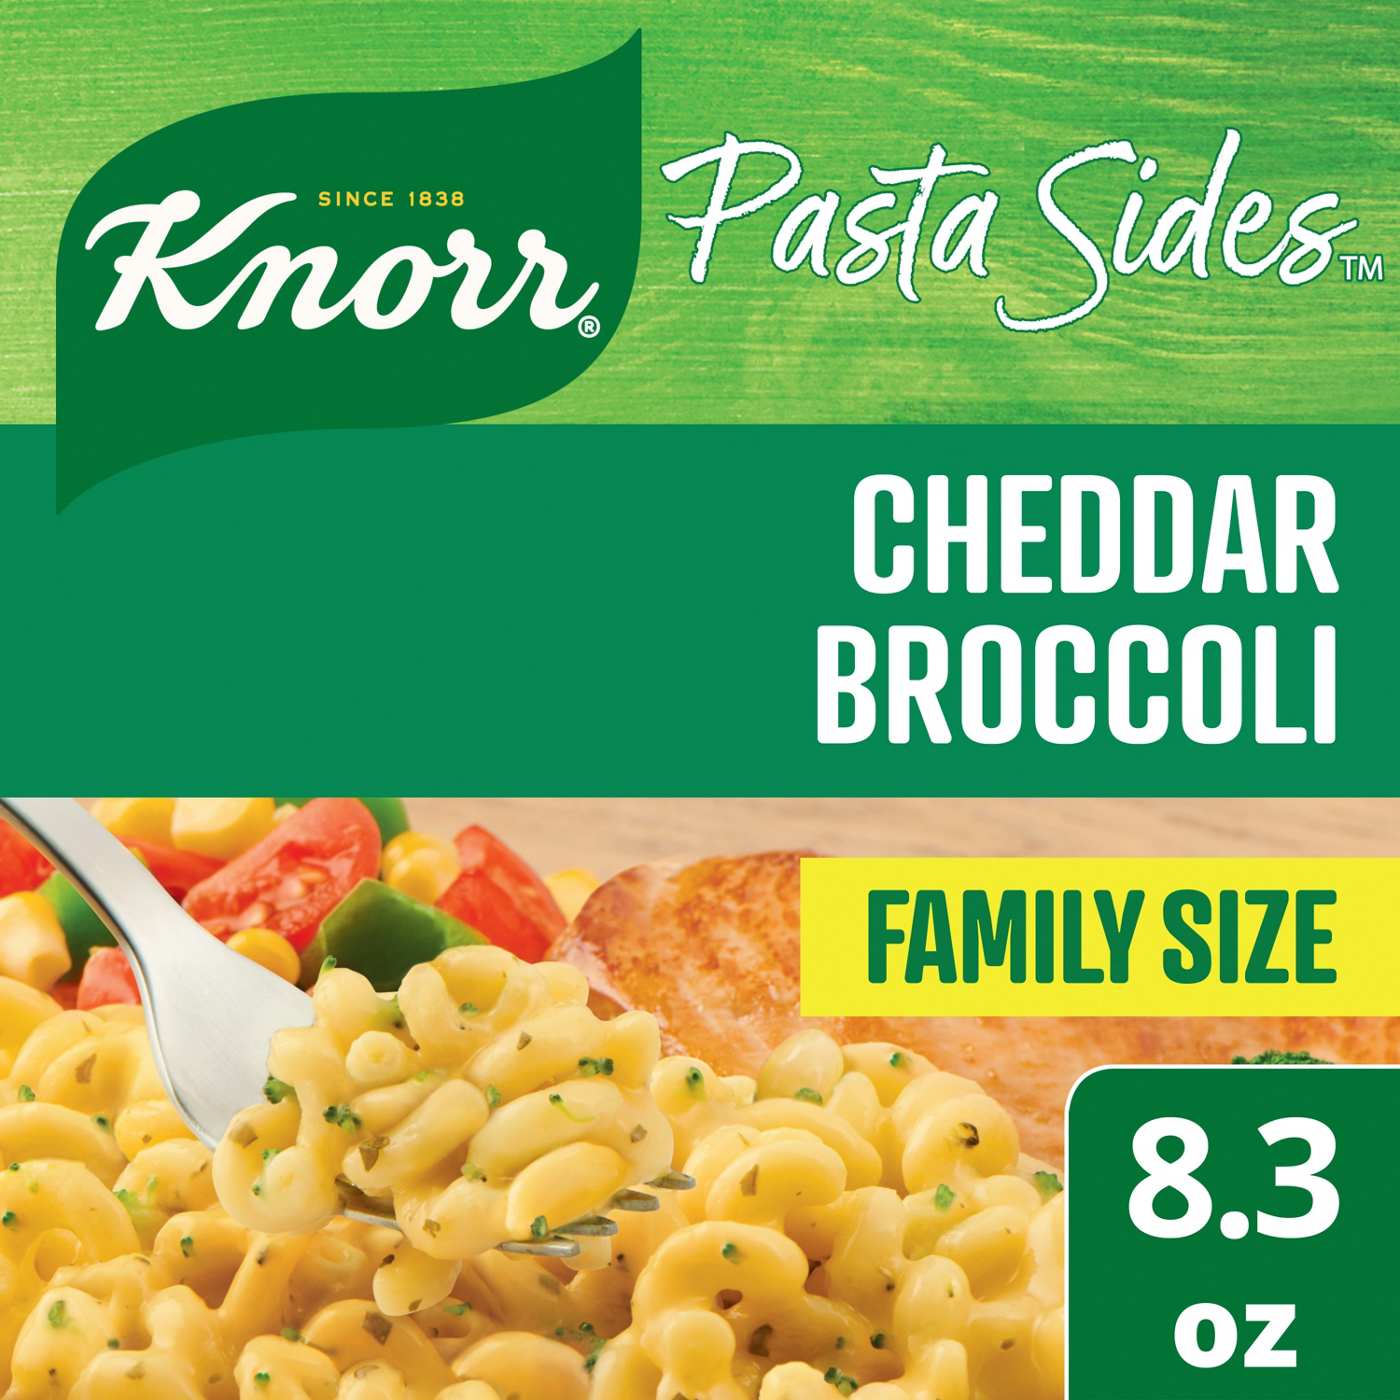 Knorr Pasta Sides Cheddar Broccoli Family Size; image 2 of 3